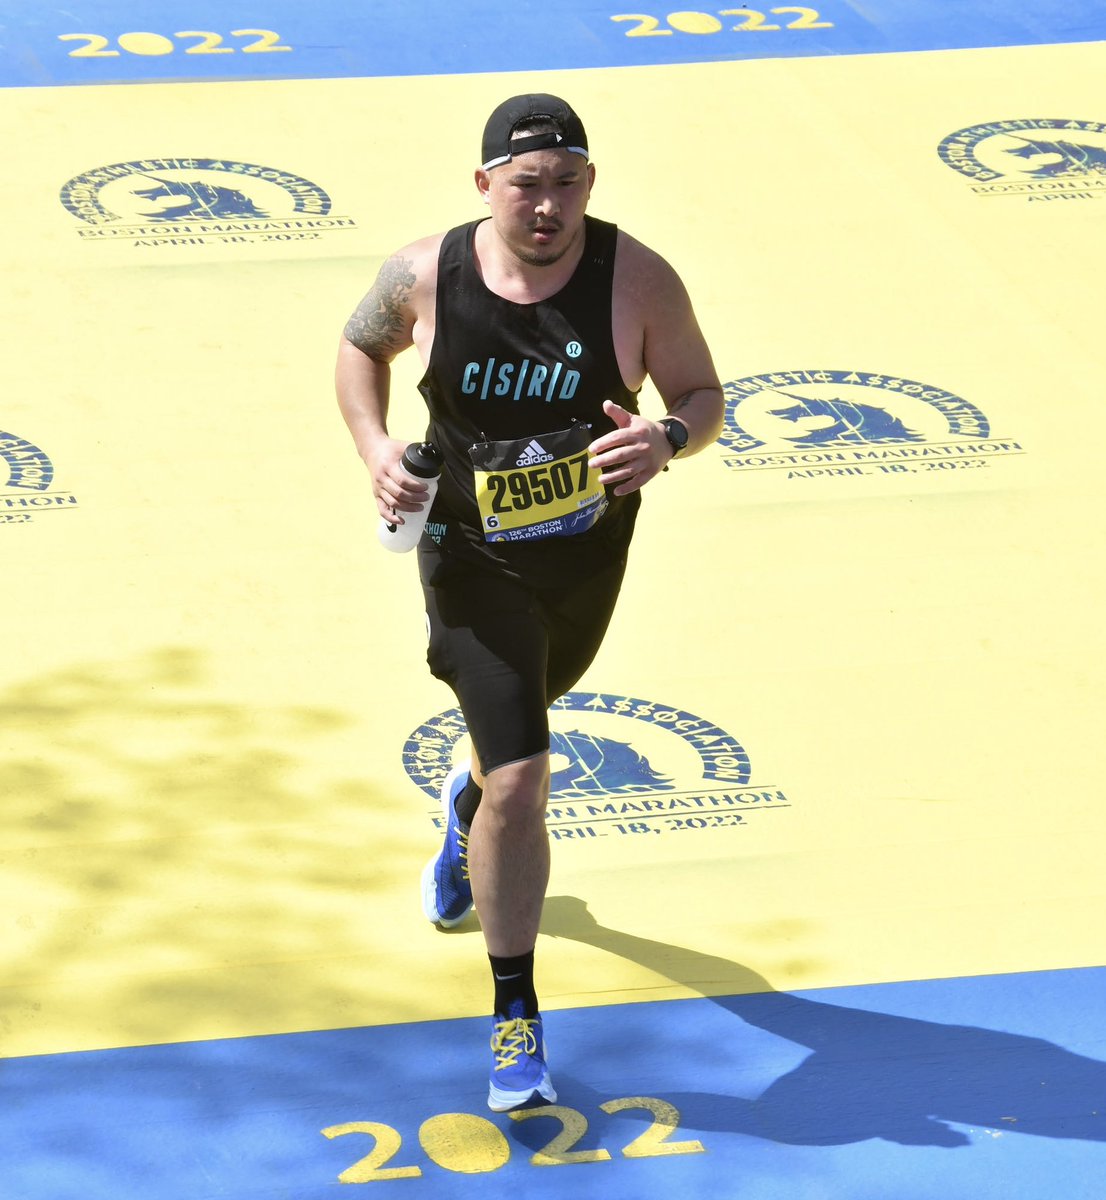 all about themes, my best race was Boston ‘22, and had my Vaporfly colors matching the Marathon colors, along with that , I had my run crew singlet and matching tights. Deion Sanders said it best, “look good, feel good. Feel good, perform good.” #ULTRAMARATHONCONTEST #TeamUltra https://t.co/aYd1SWui8M